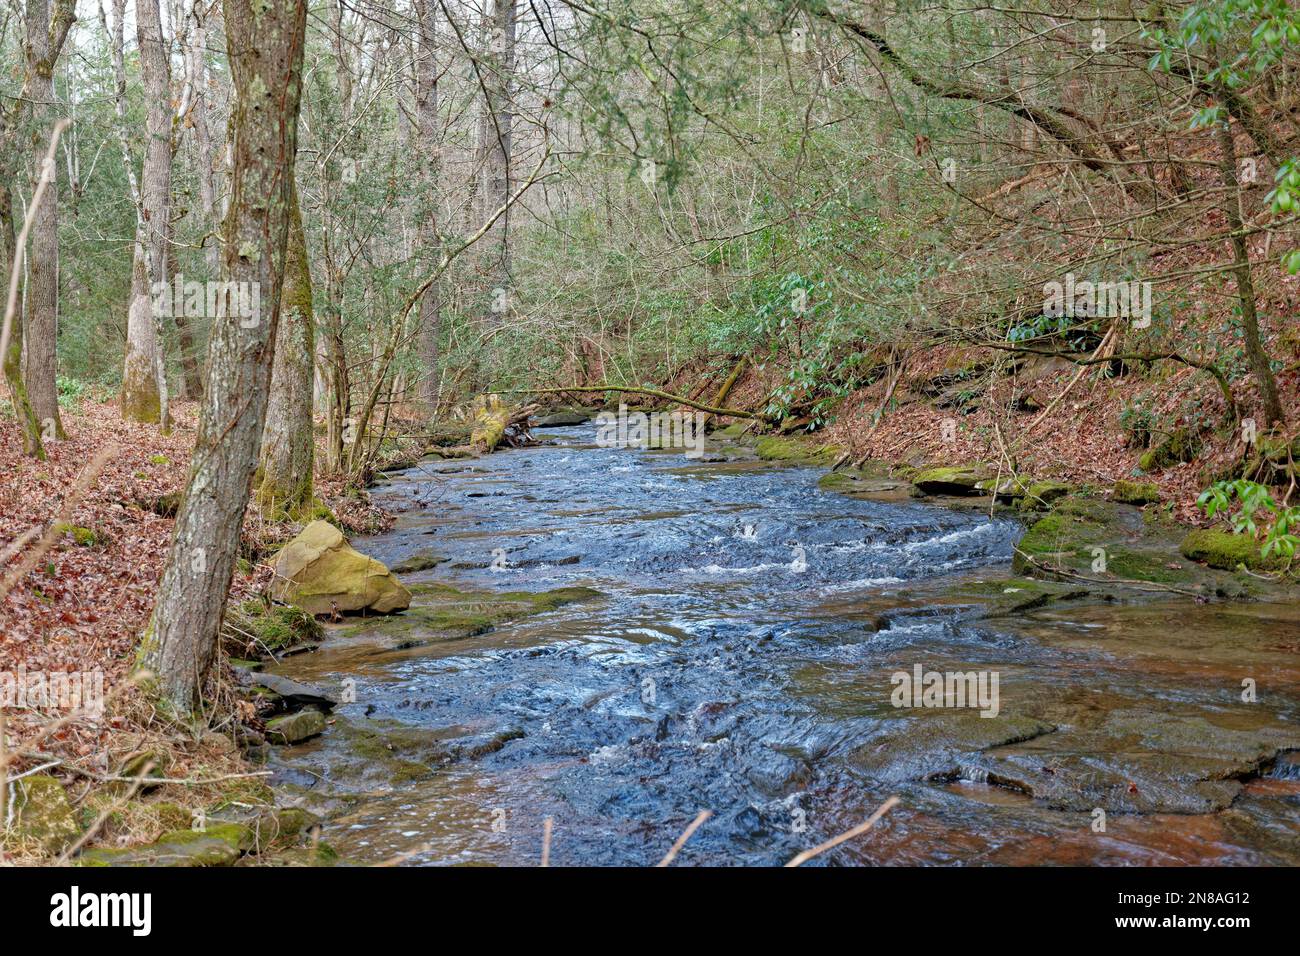 A full creek flowing through the woodlands surrounded by old growth trees and fallen leaves on the ground along the banks of the water in wintertime Stock Photo